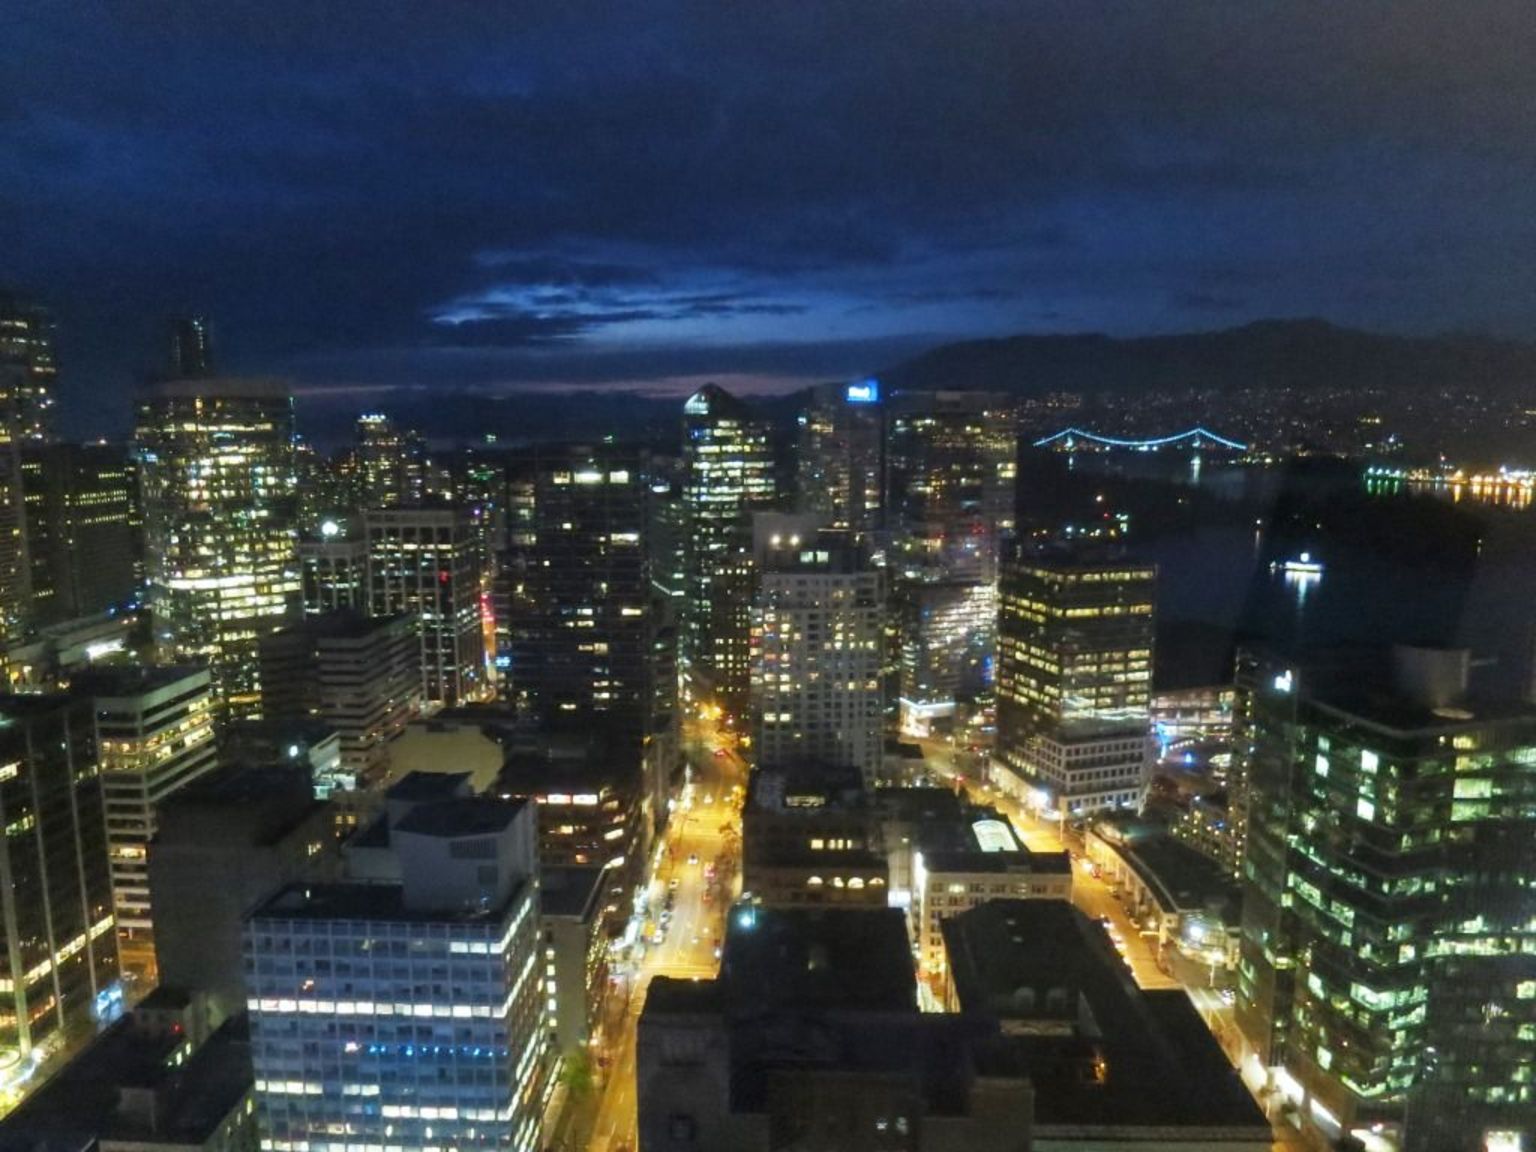 View from Vancouver Lookout at night